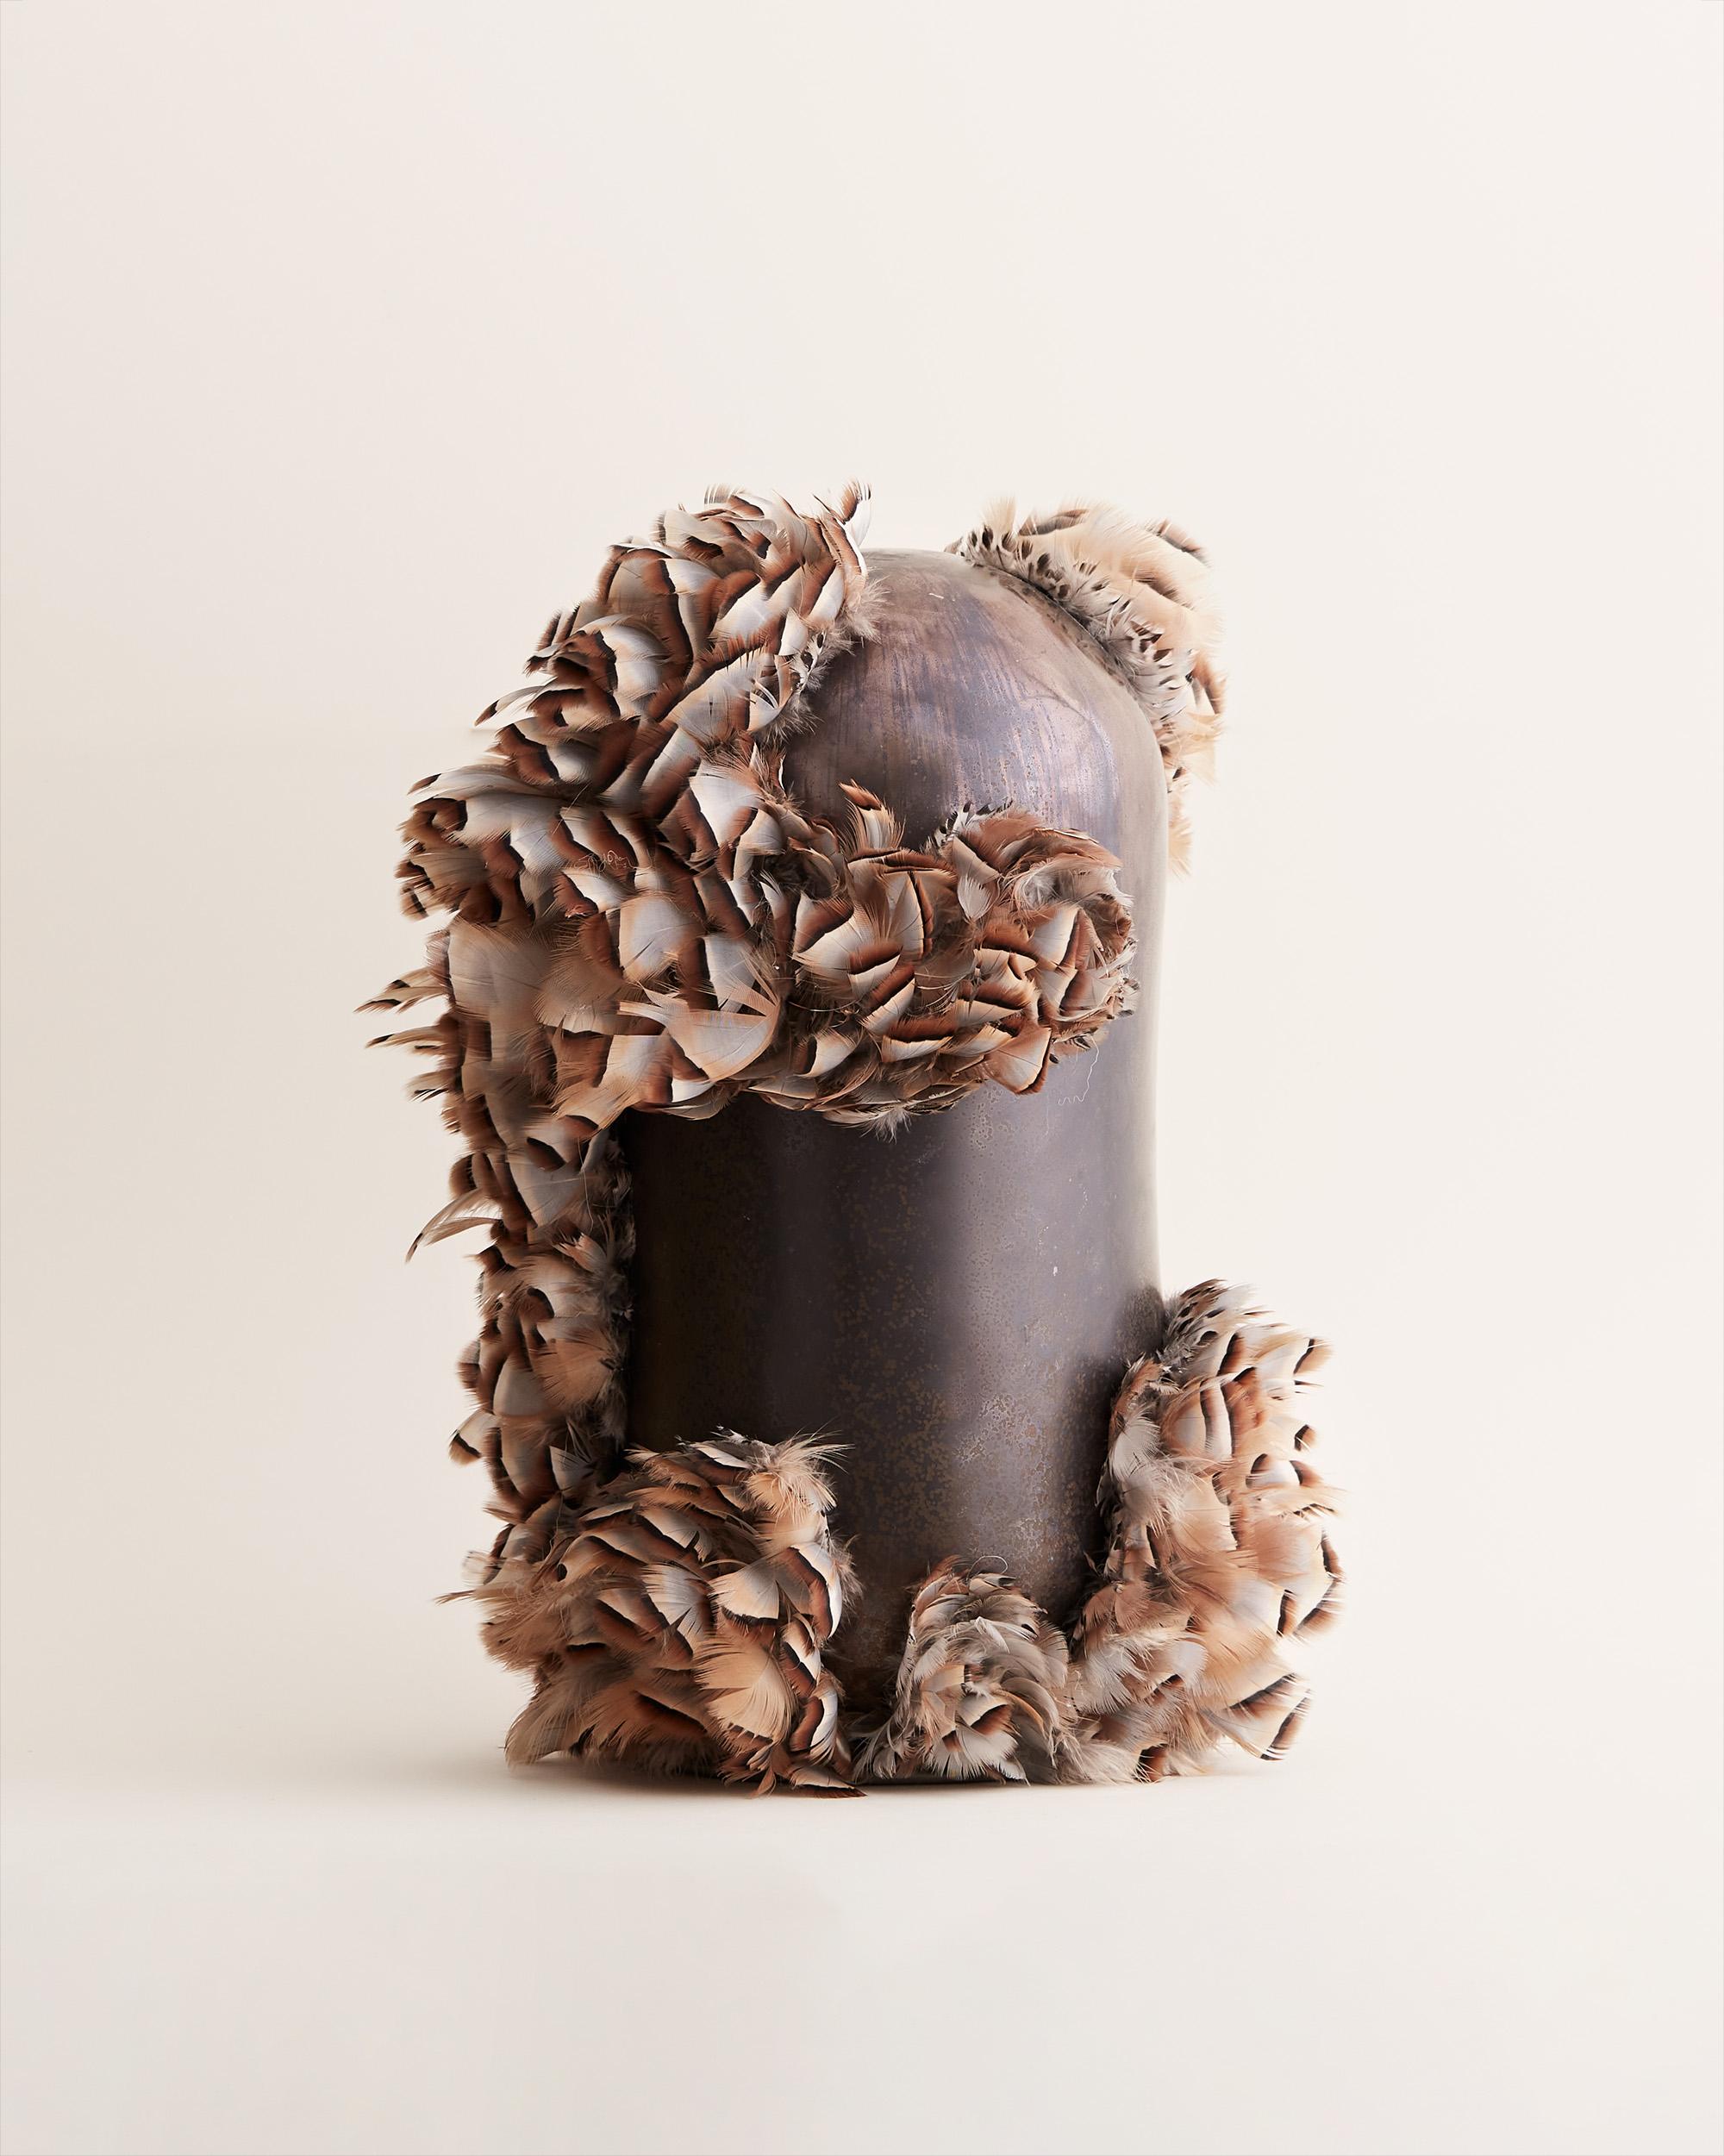 Angélique de Chabot Abstract Sculpture - Céramique Ganga - Contemporary Abstract Ceramic with feathers sculpture